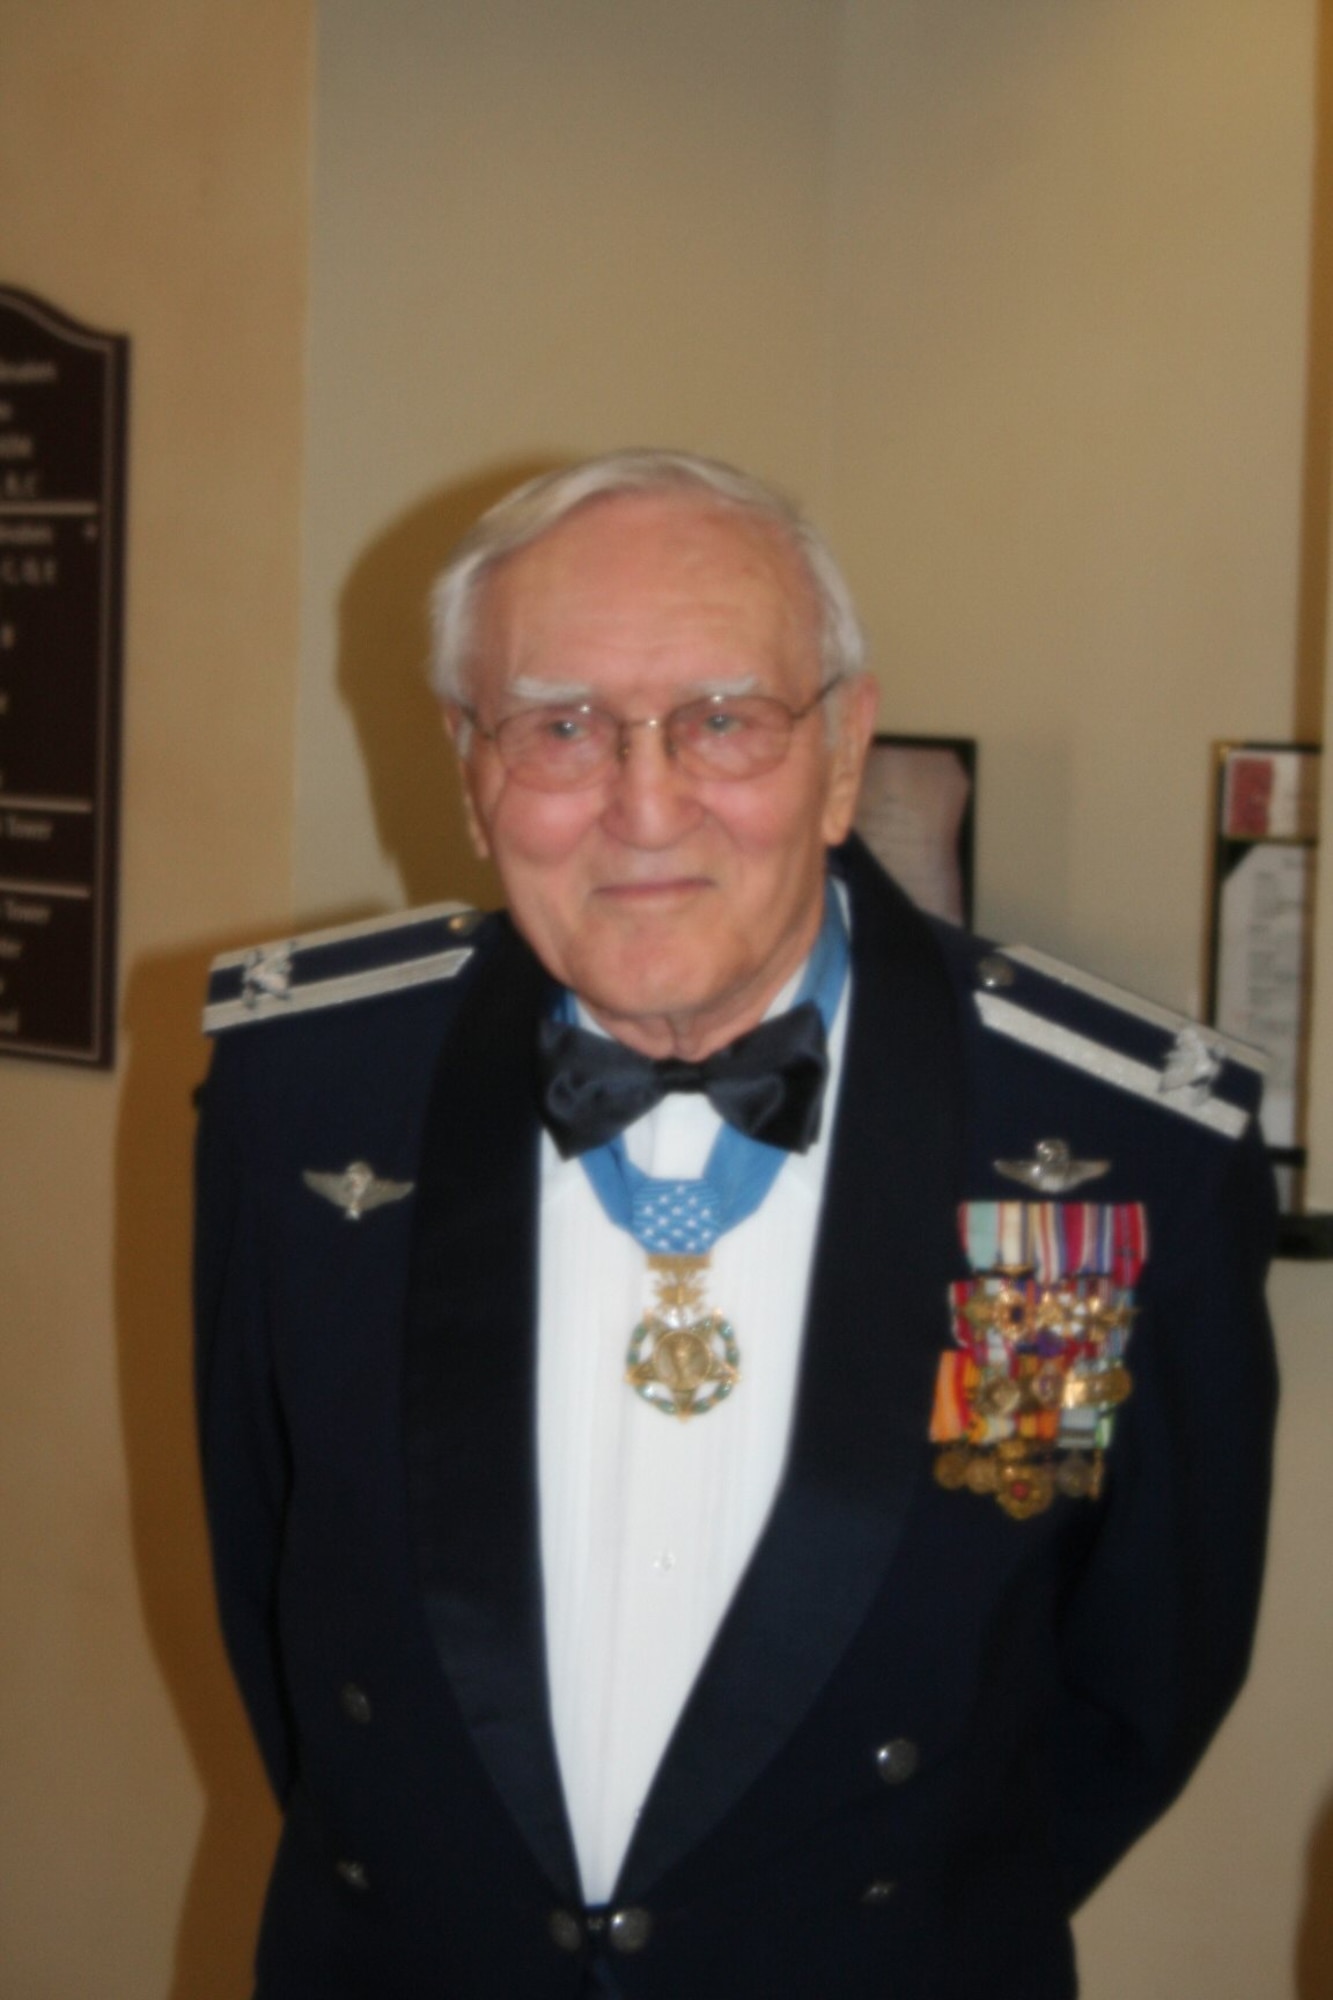 Retired Col. George "Bud" Day, Medal of Honor recipient and former prisoner of war, poses in Midland, Texas, in 2007 after being inducted into the American Combat Airman Hall of Fame. (Photo courtesy of Joe Caruso)